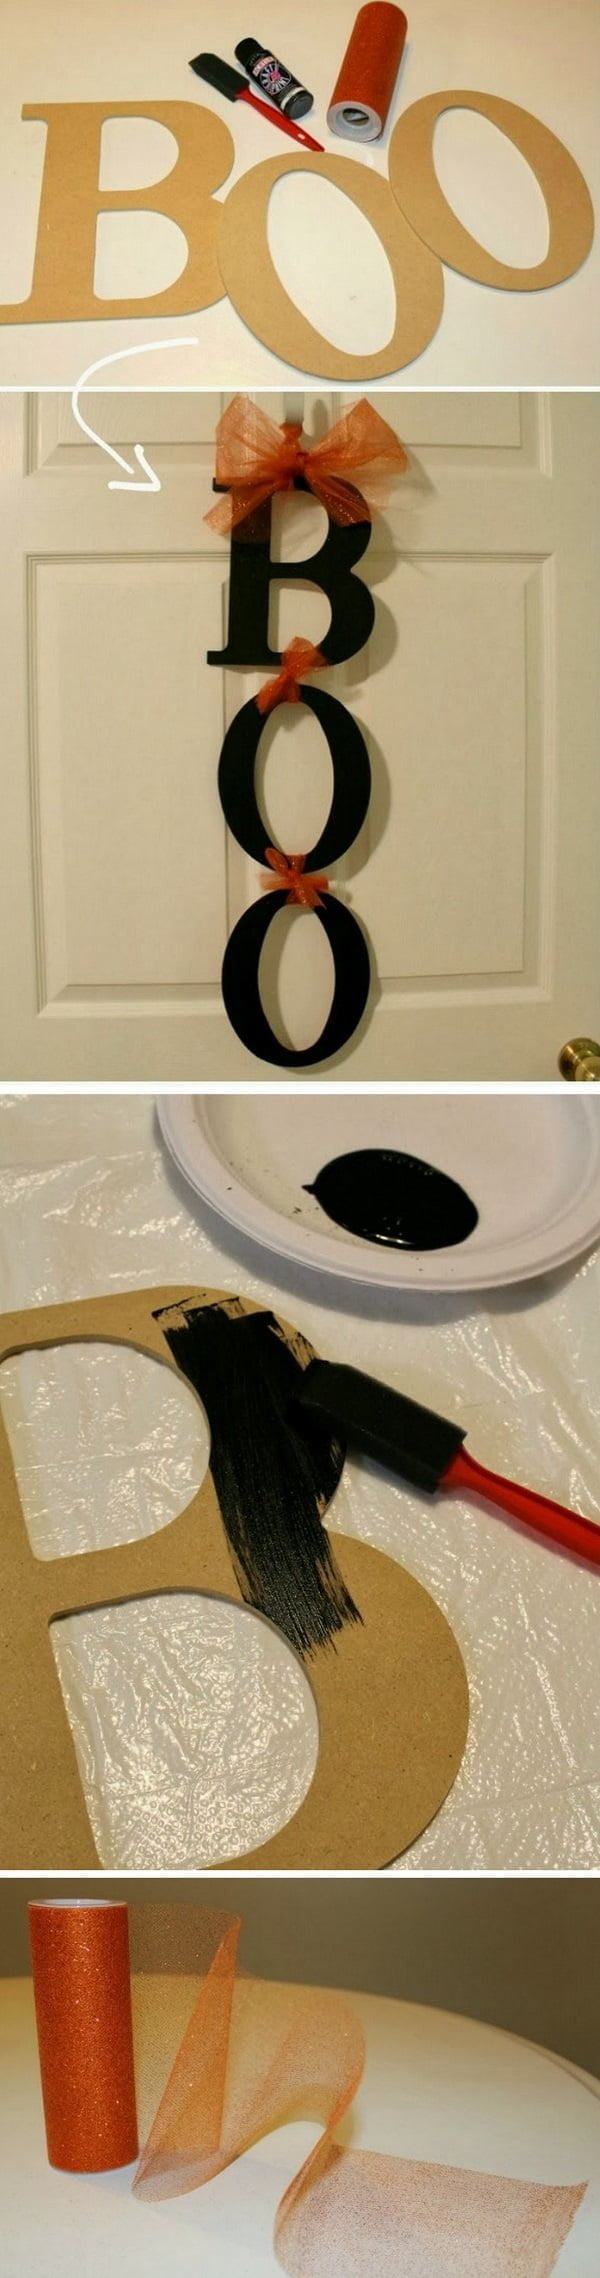 Check out the tutorial on how to make a DIY wooden boo sign for Halloween home decoration